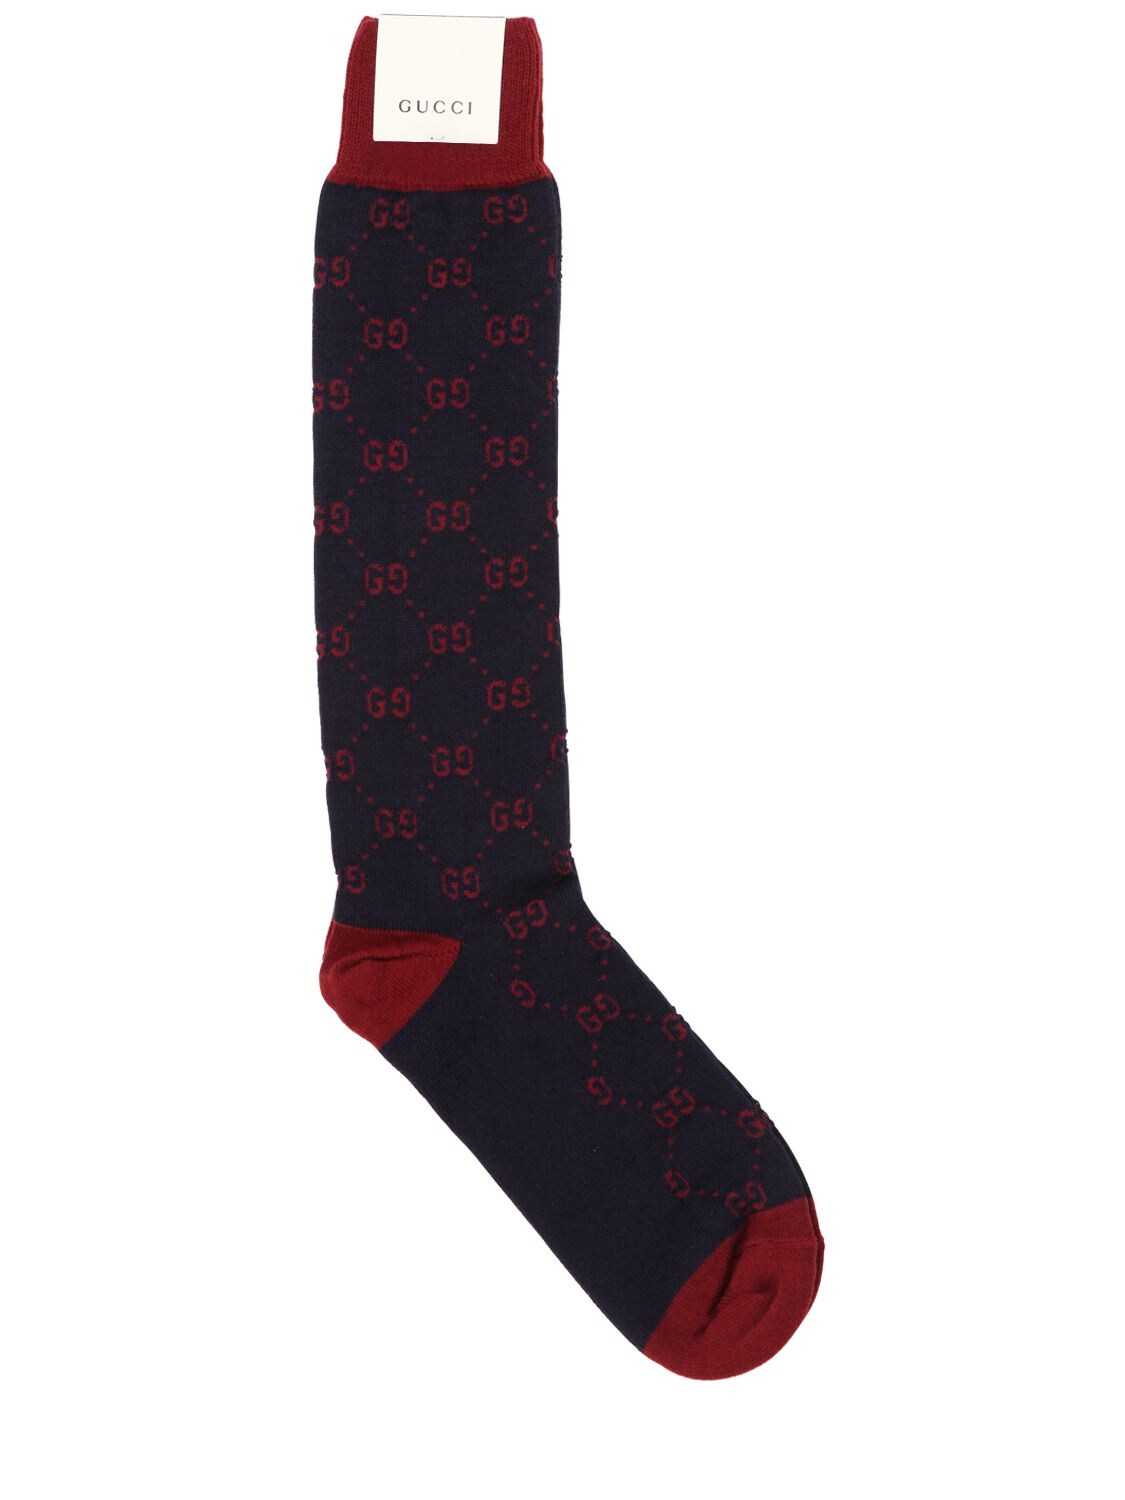 Gucci Gg Supreme Wool Blend Knit Socks In Navy,red